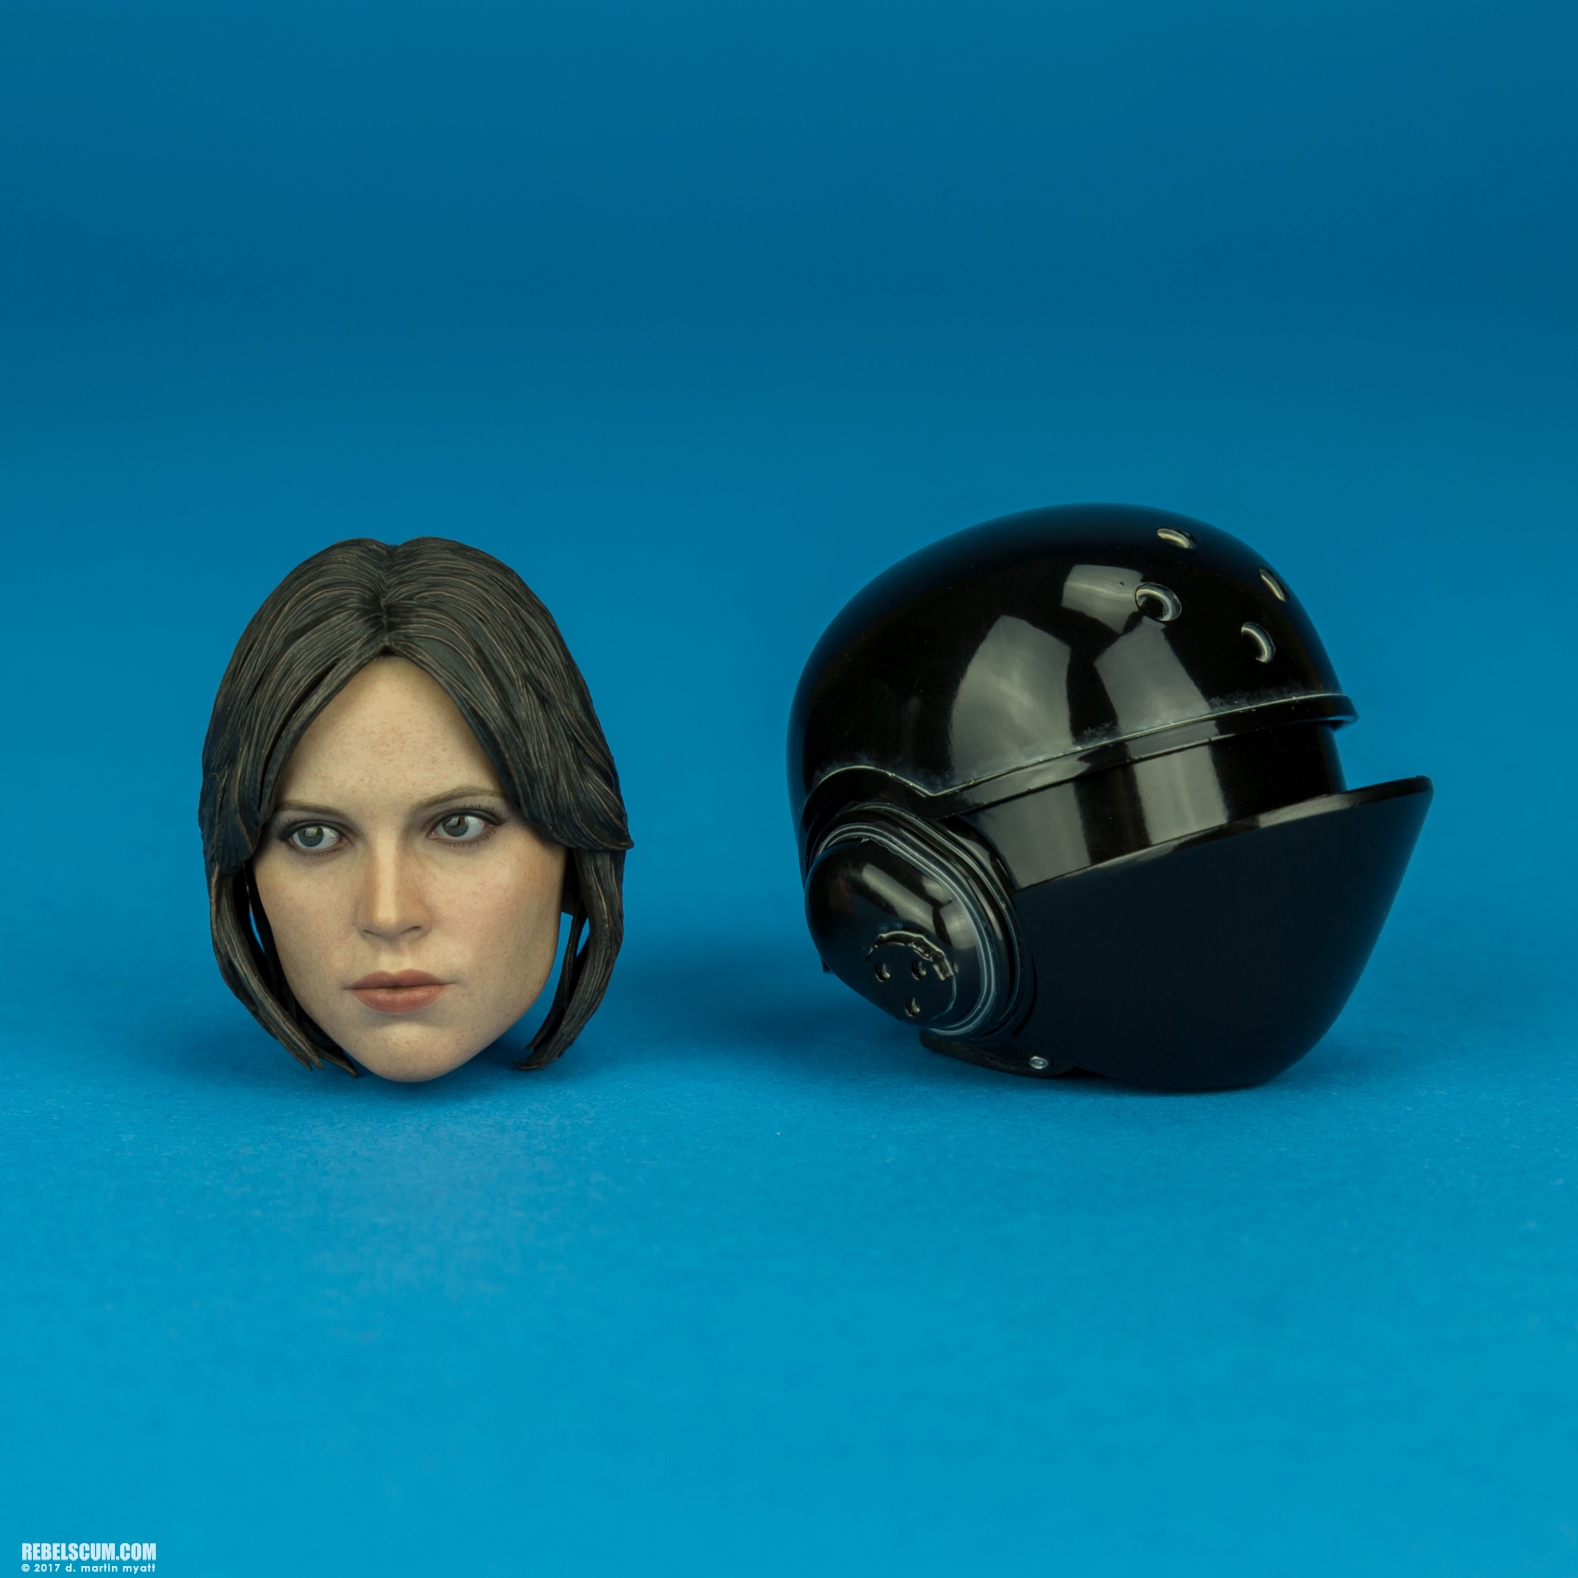 MMS419-Jyn-Erso-Imperial-disguise-Rogue-One-Hot-Toys-011.jpg